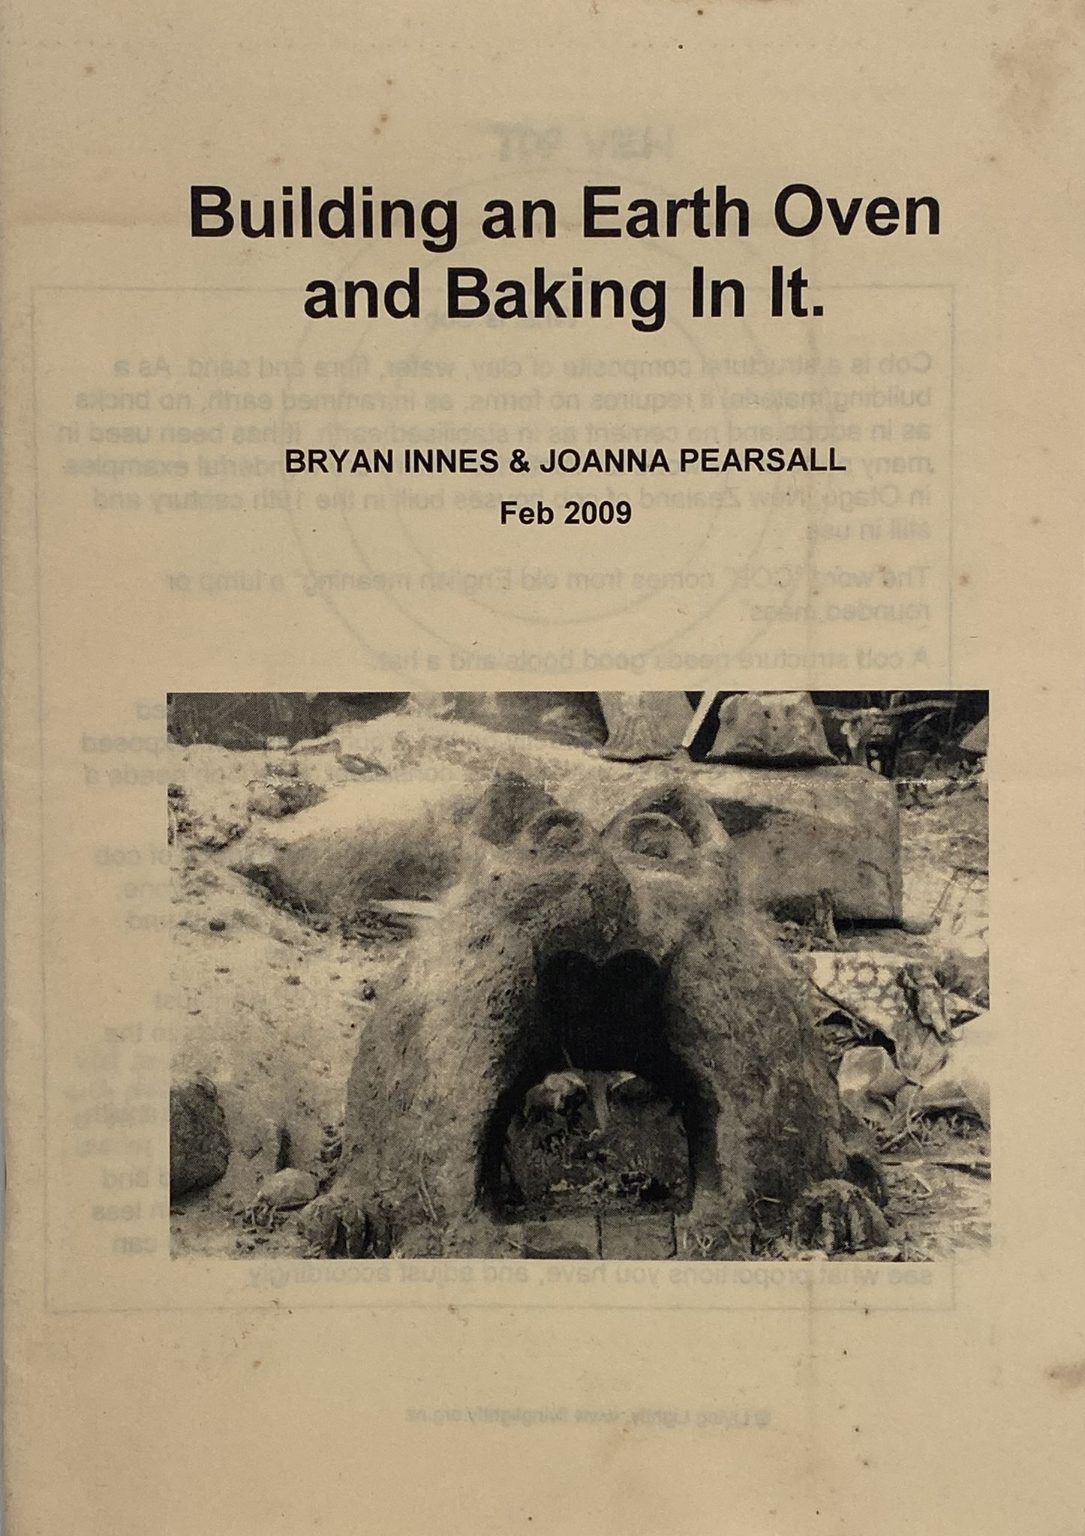 BUILDING AN EARTH OVEN: And Baking in it